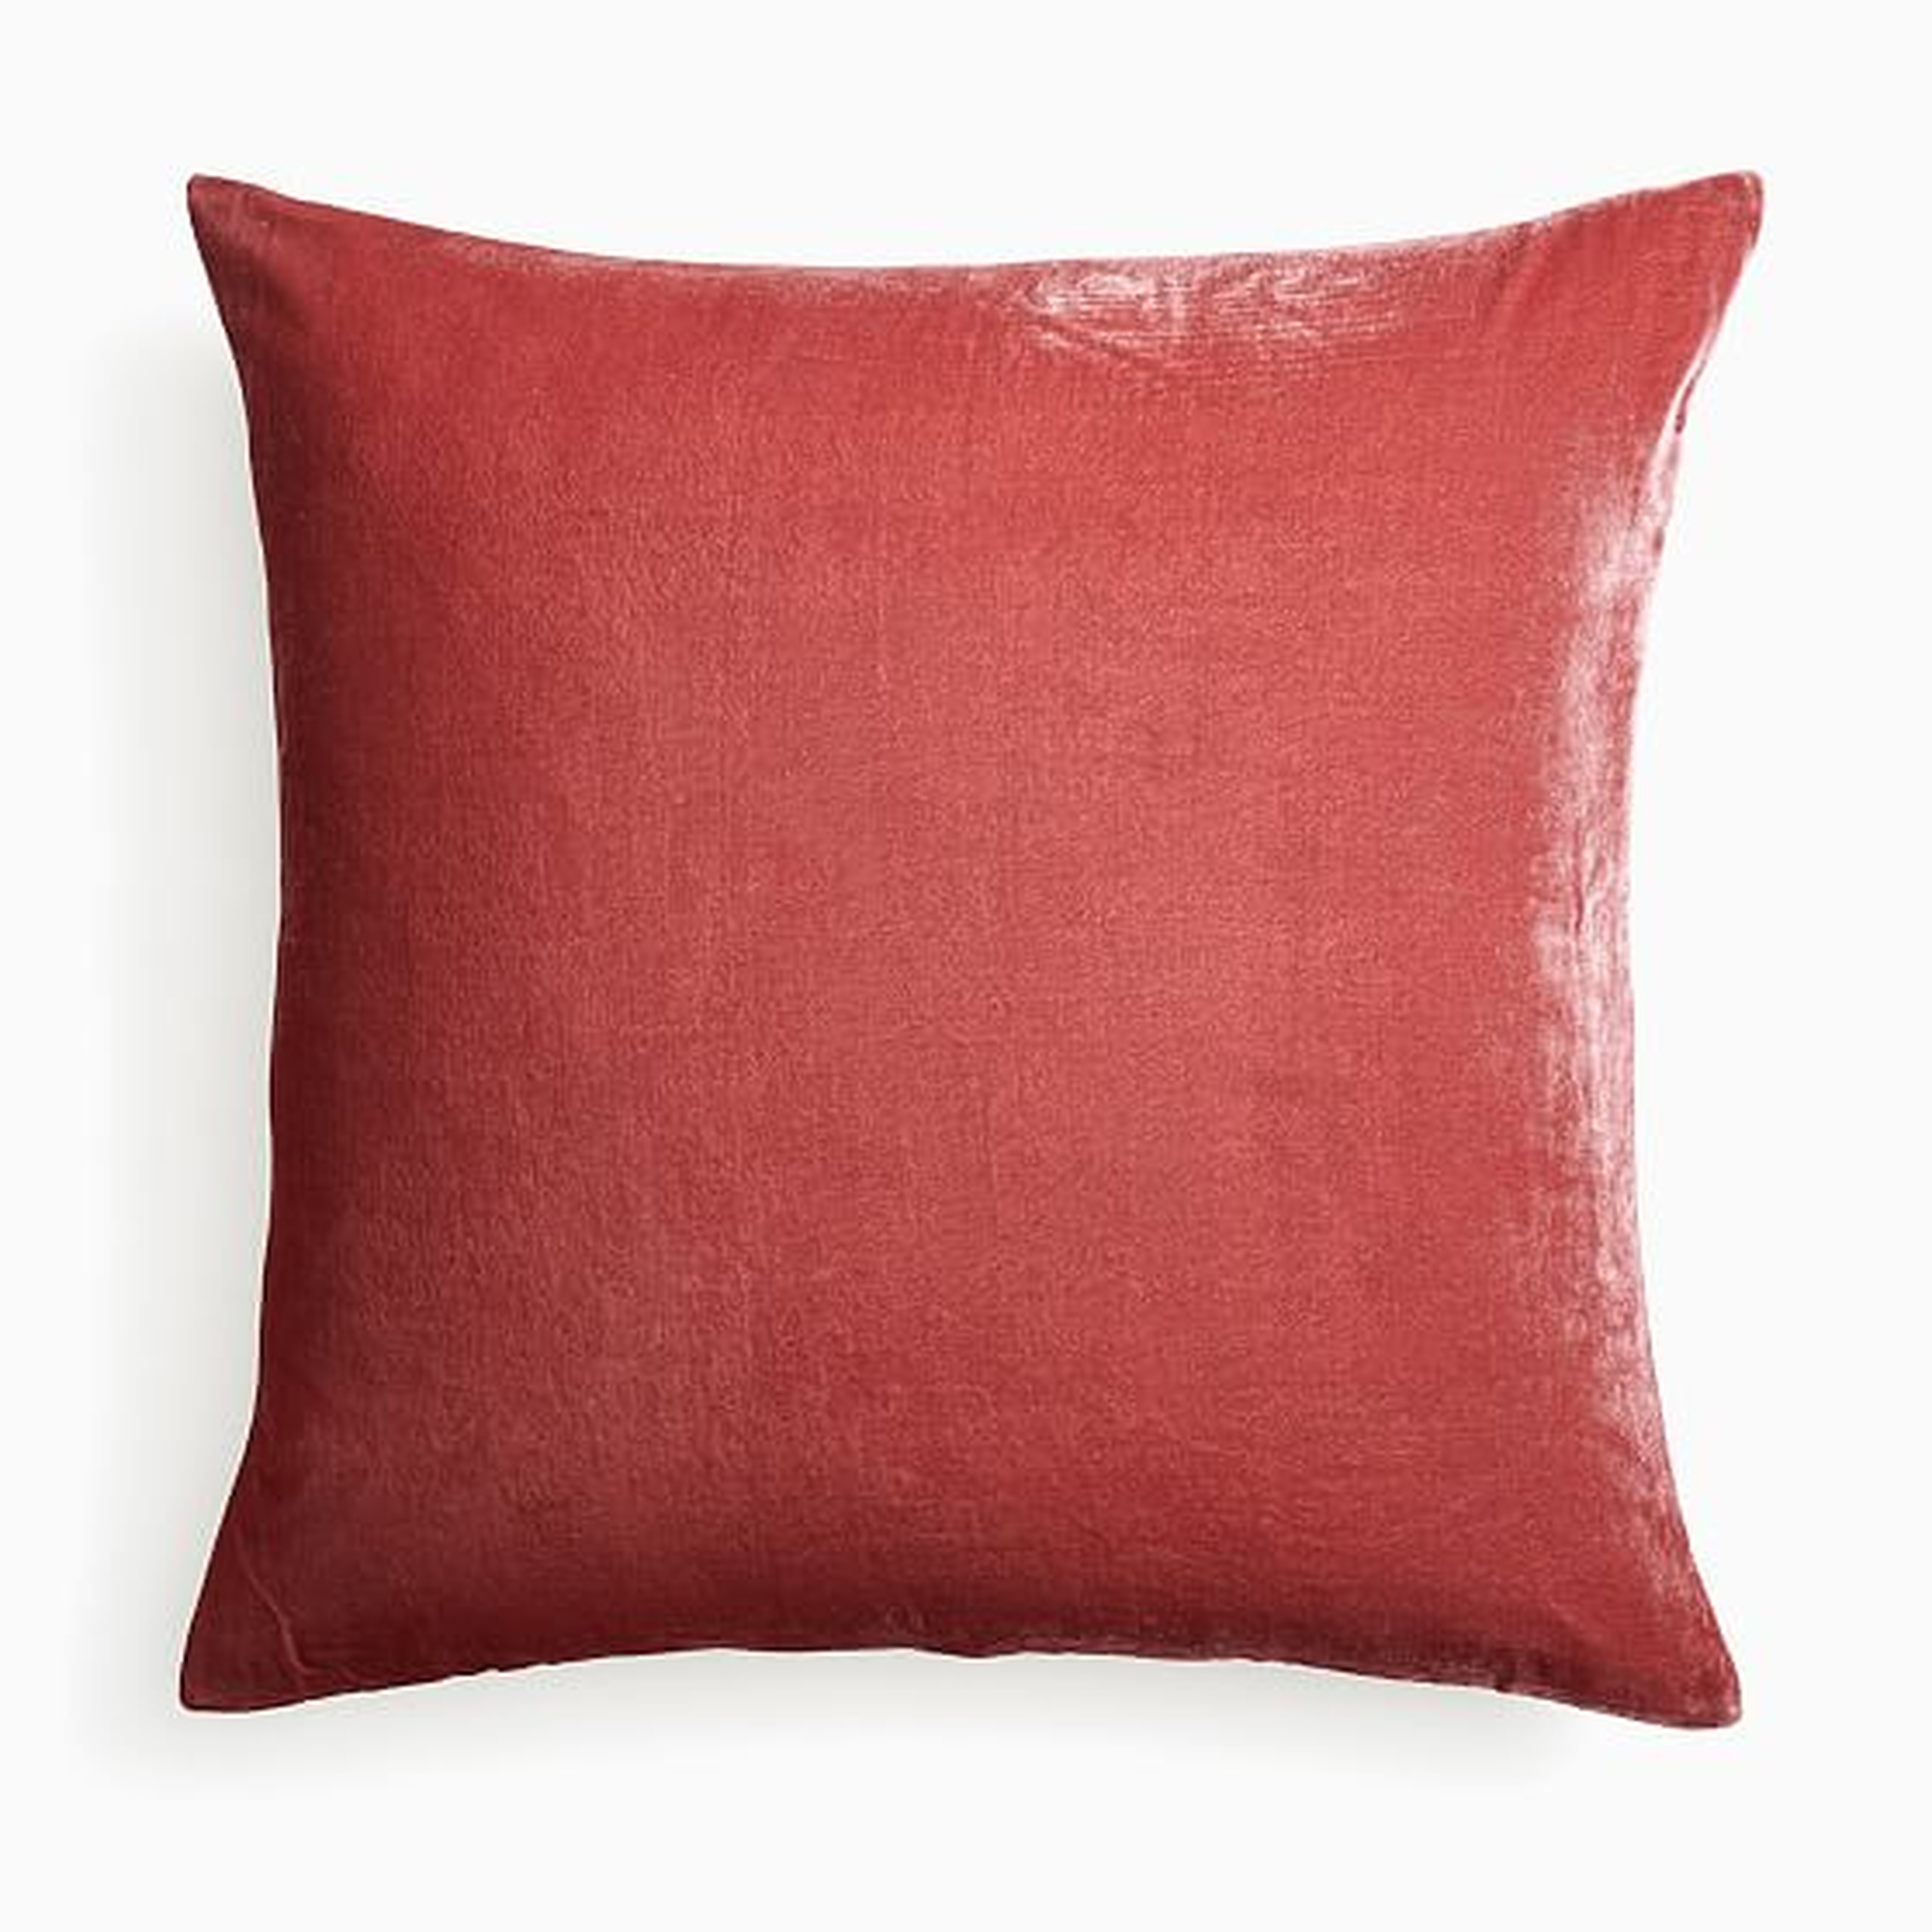 Lush Velvet Pillow Cover, 24"x24", Washed Ruby - West Elm